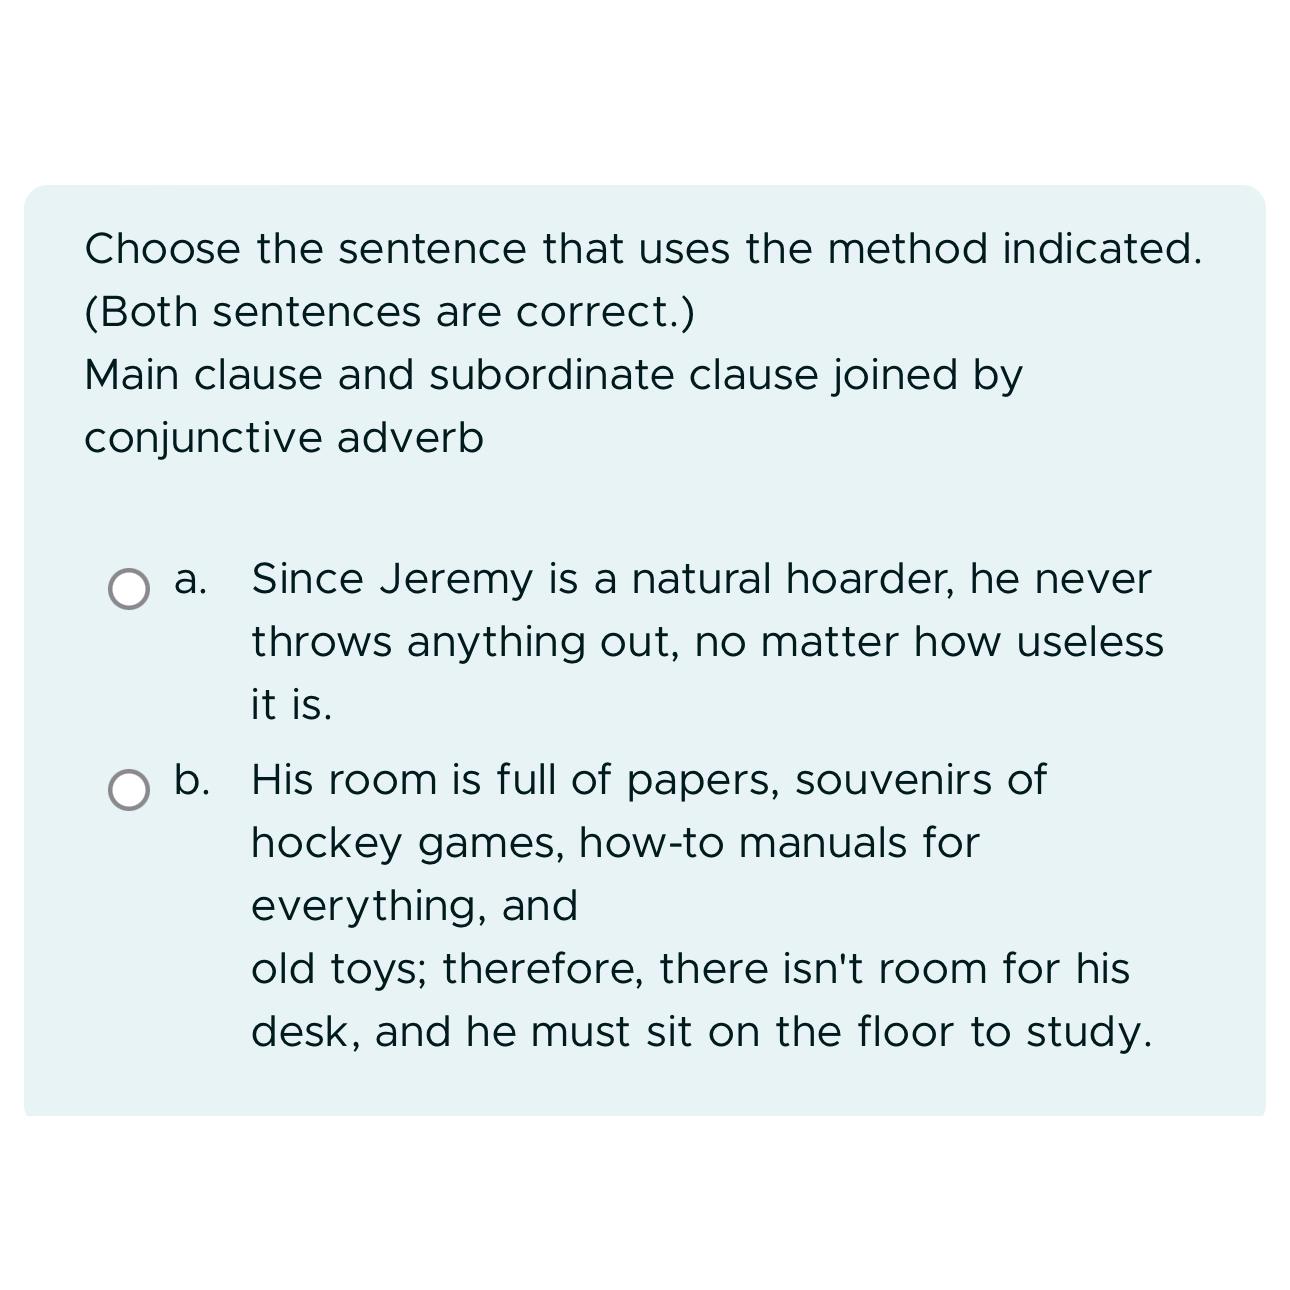 Choose the sentence that uses the method indicated. (Both sentences are correct.) Main clause and subordinate